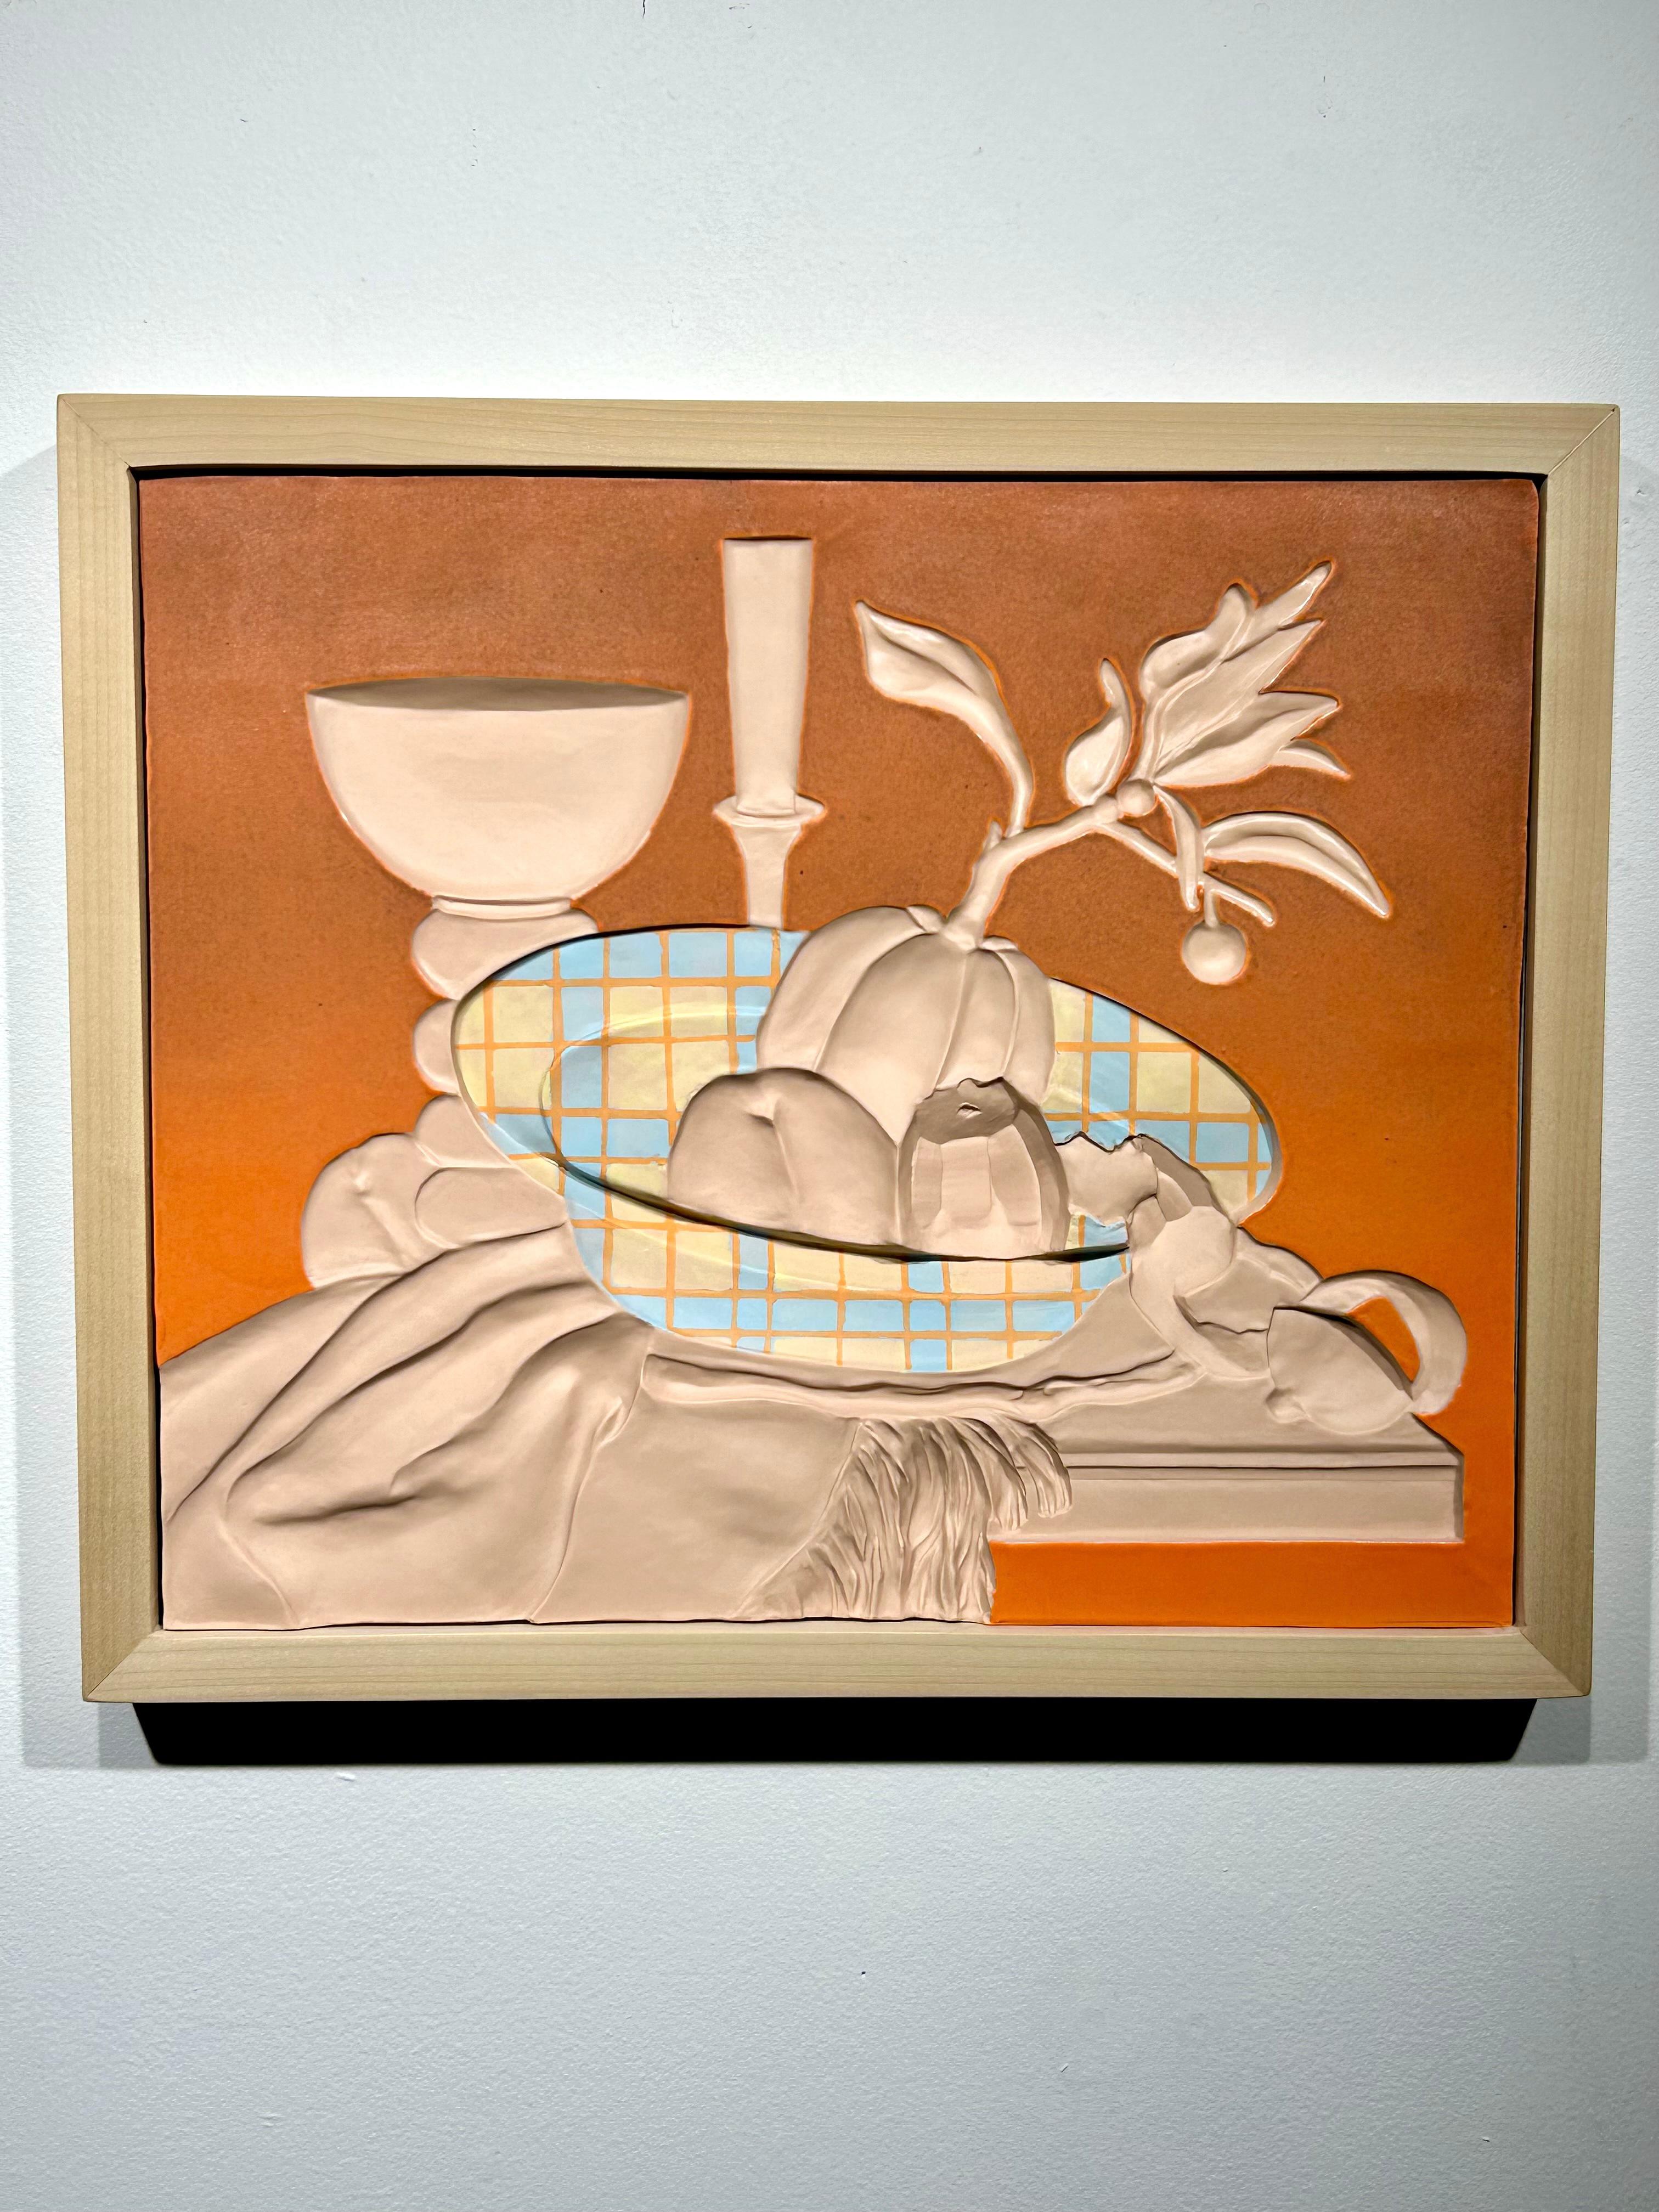 Dirk Staschke Figurative Sculpture - Inverted Still life with Plaid Bowl